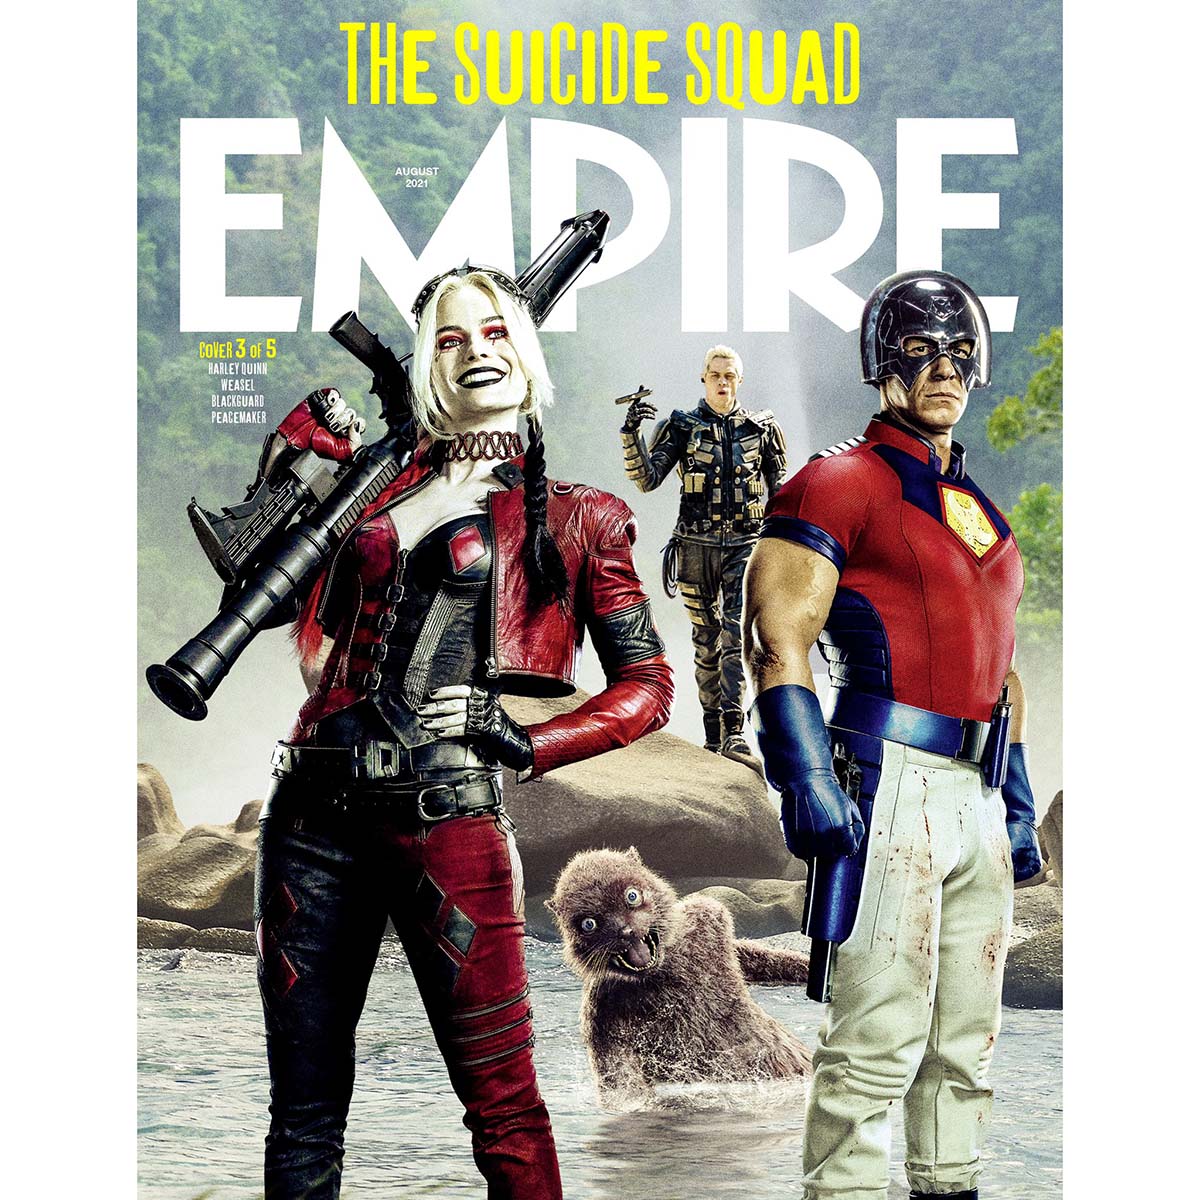 Empire Magazine Issue 391 (August 2021) James Gunn x The Suicide Squad